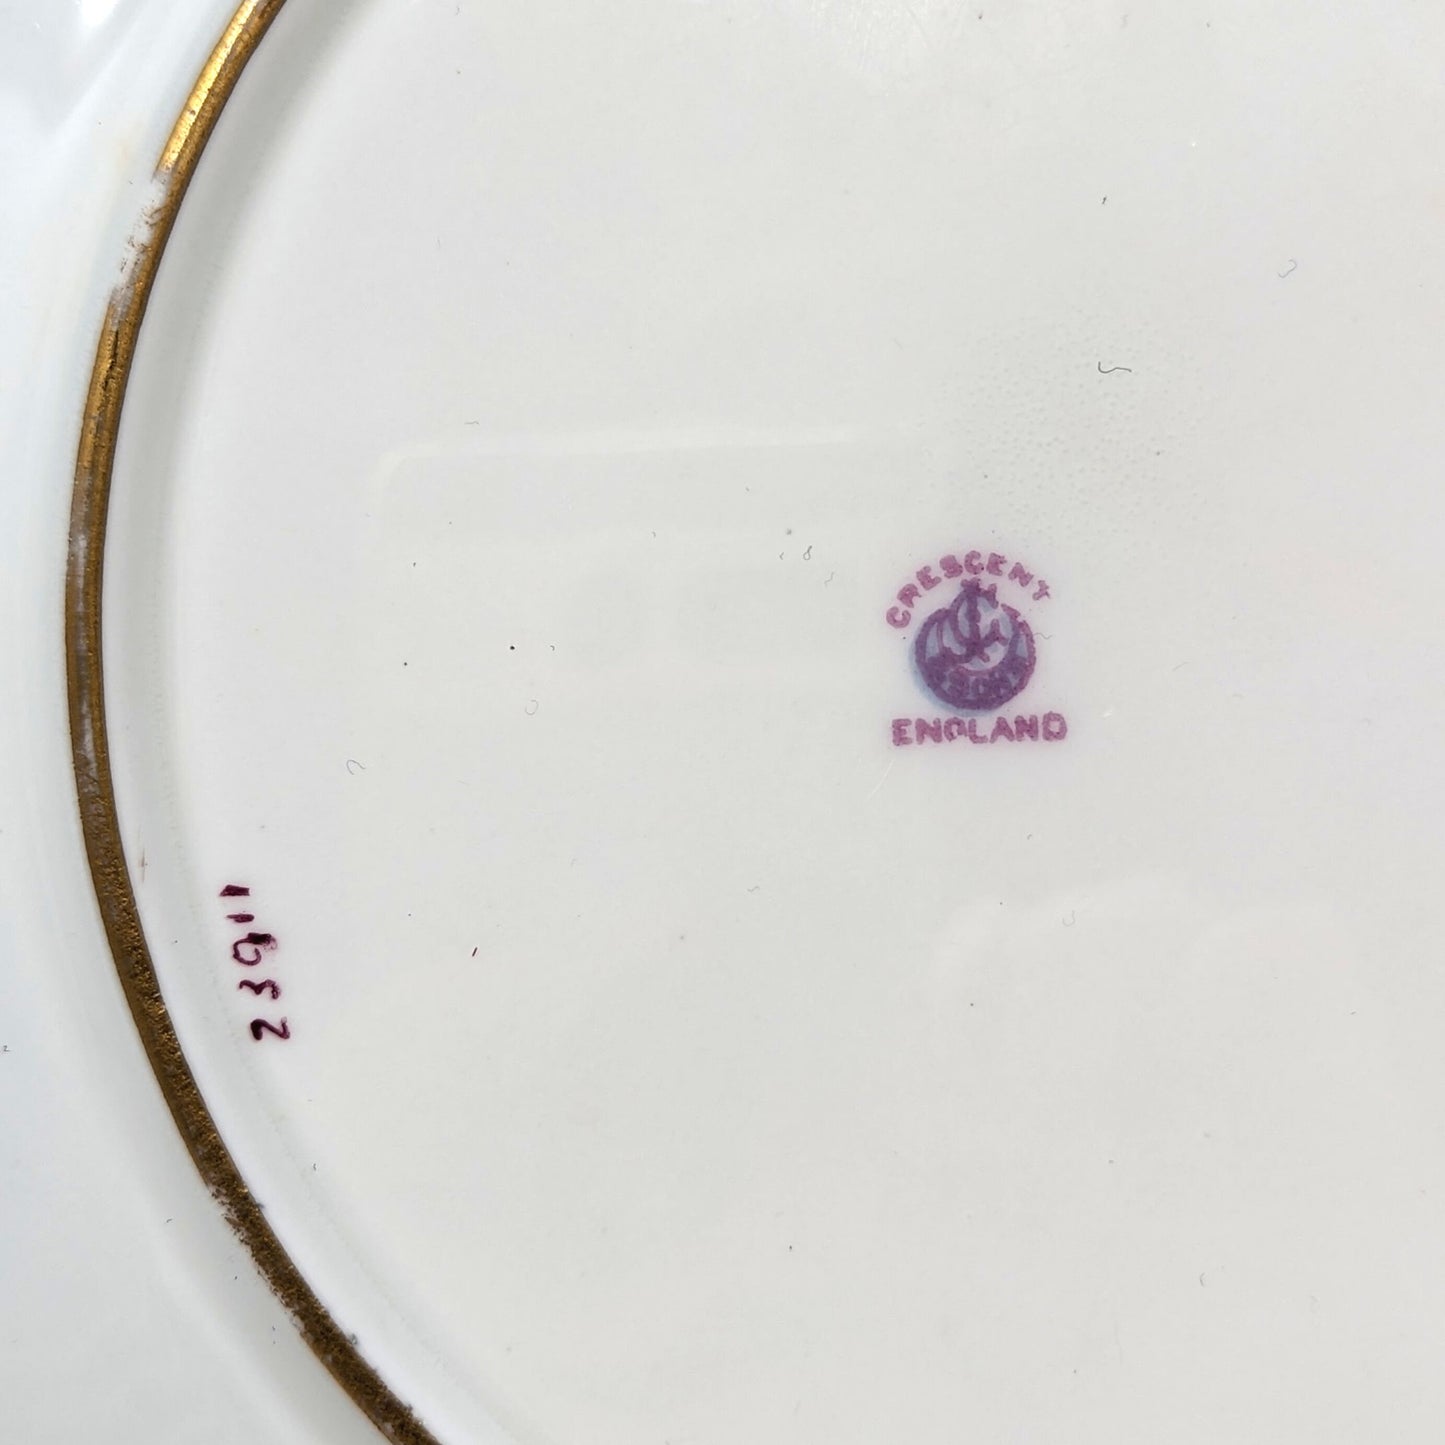 George Jones & Son Crescent China Hand Painted Service Plates (6)